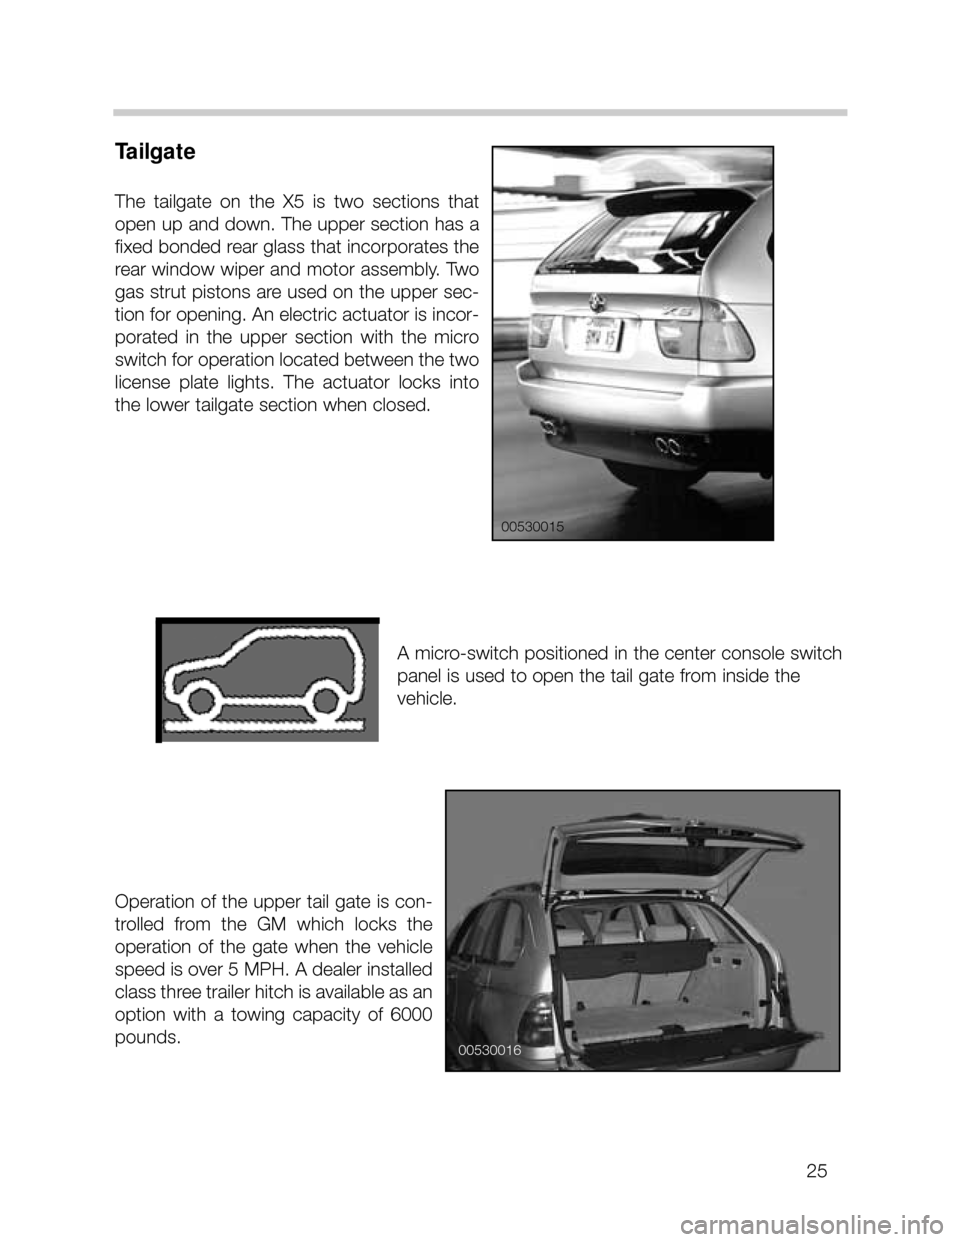 BMW X5 1999 E53 Workshop Manual 25
Tailgate
The  tailgate  on  the  X5  is  two  sections  that
open up and down. The upper section has a
fixed bonded rear glass that incorporates the
rear window wiper and motor assembly. Two
gas st